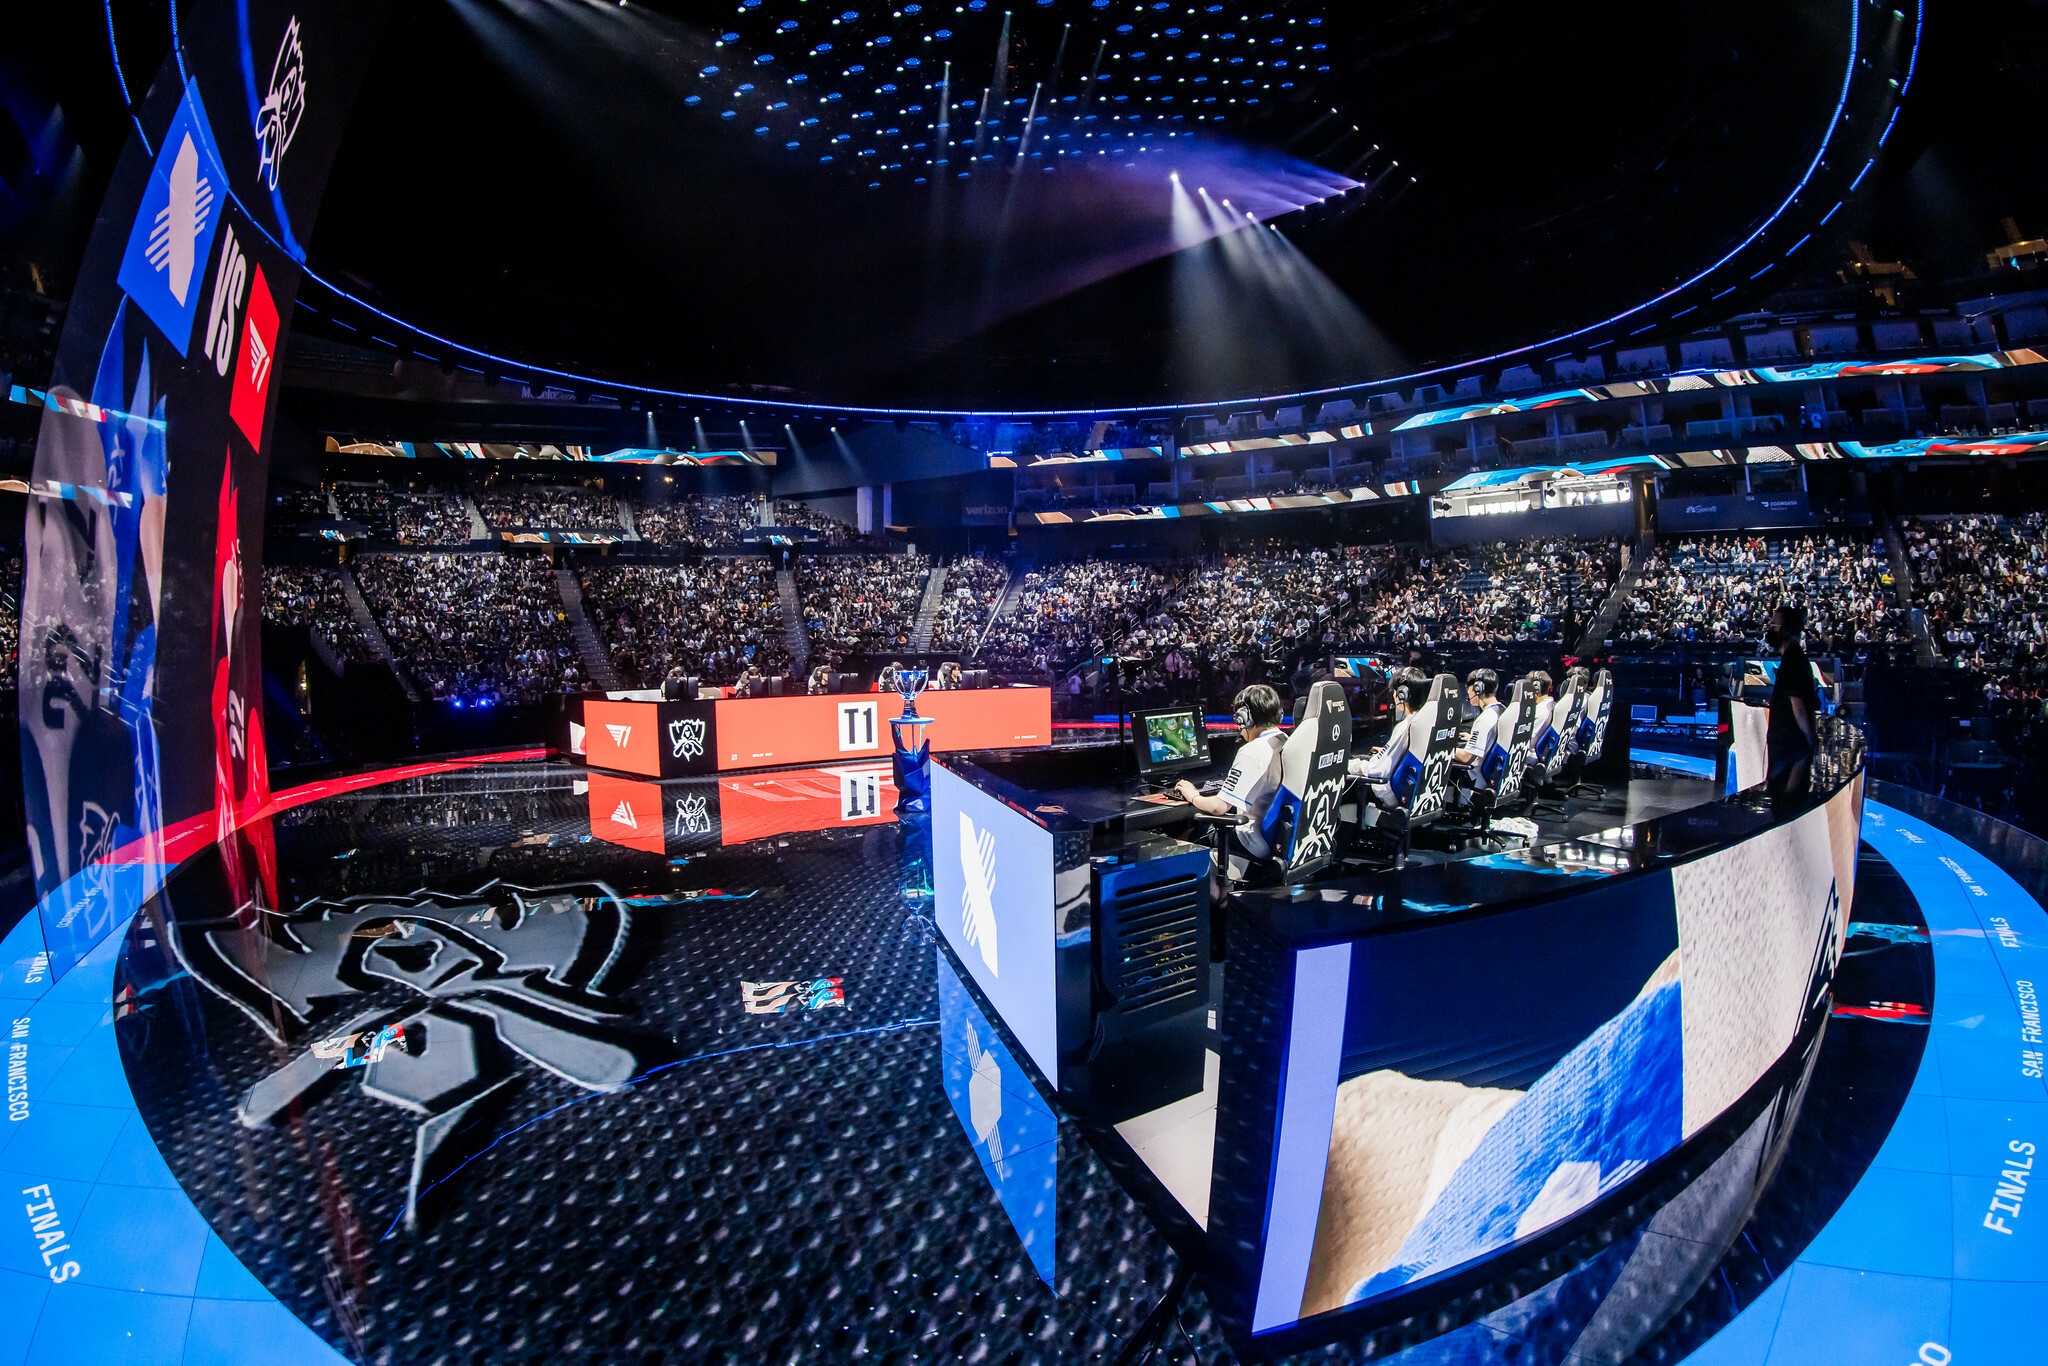 Where to watch the LoL Worlds 2022 Finals